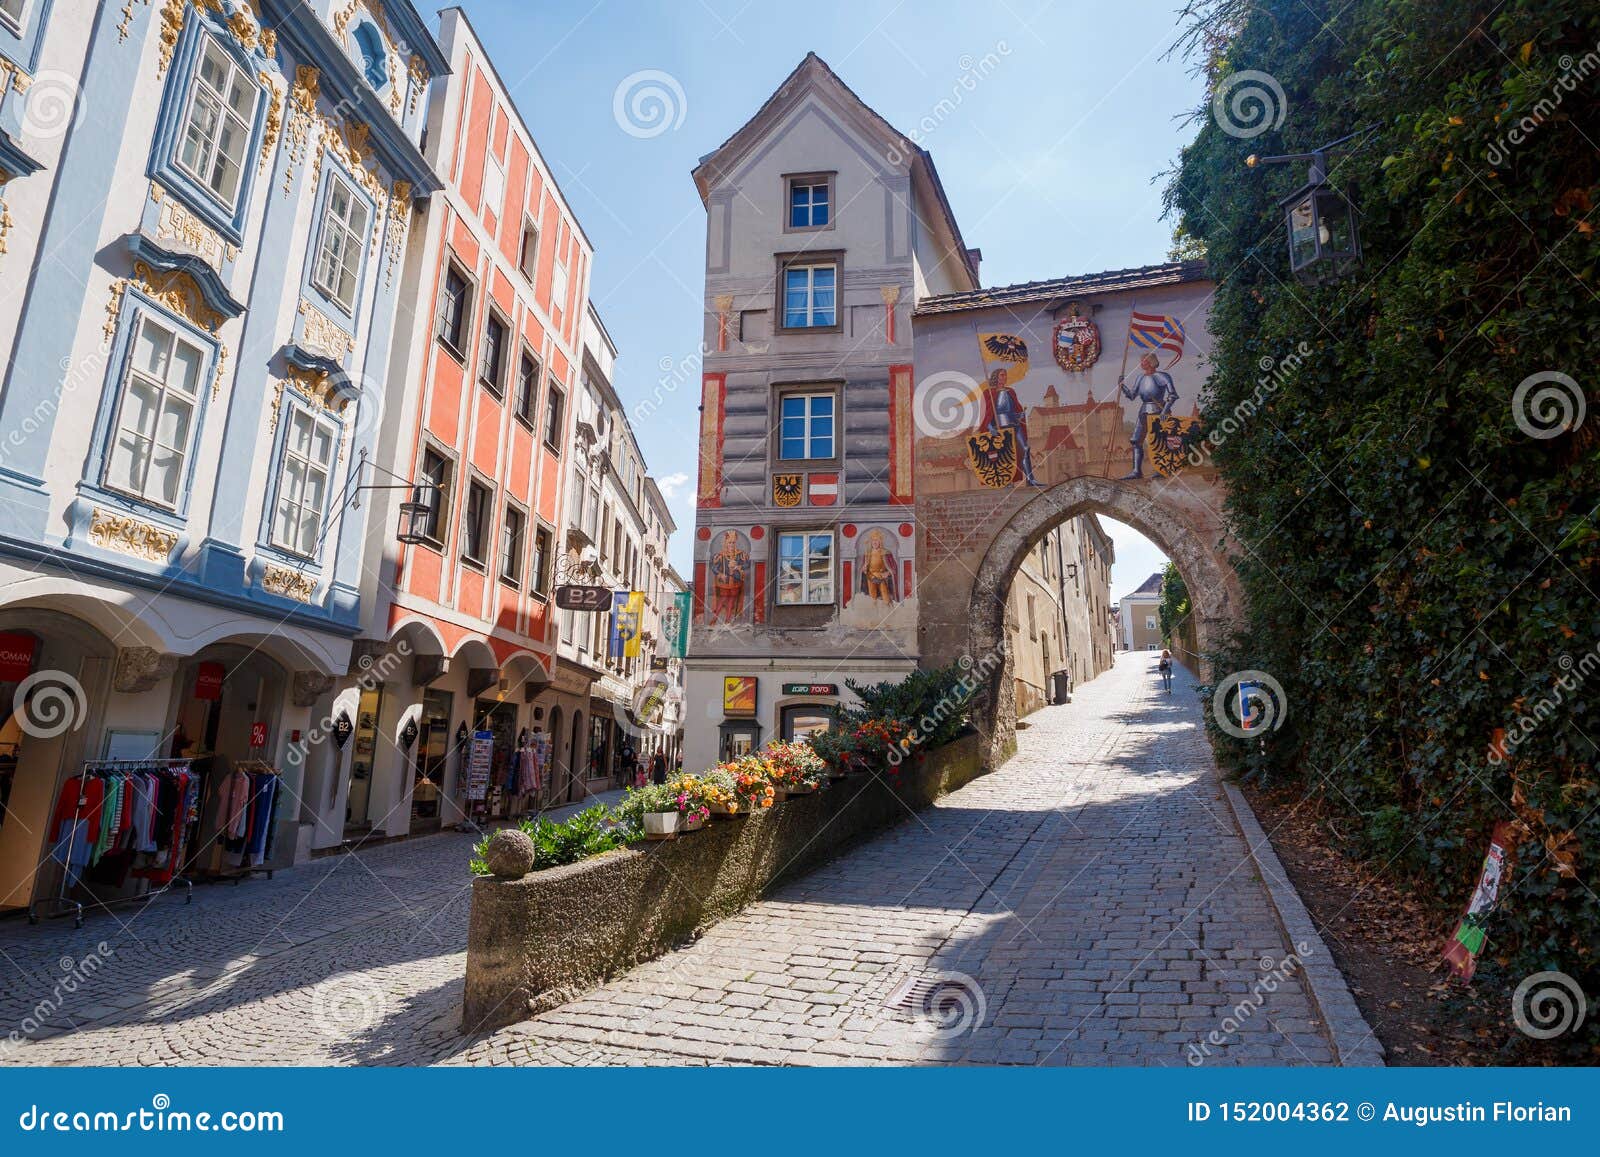 Gum Accepteret snesevis Steyr, Austria - July 19, 2018: Colorful Buildings in Steyer City Center  Editorial Photography - Image of europe, landmarks: 152004362